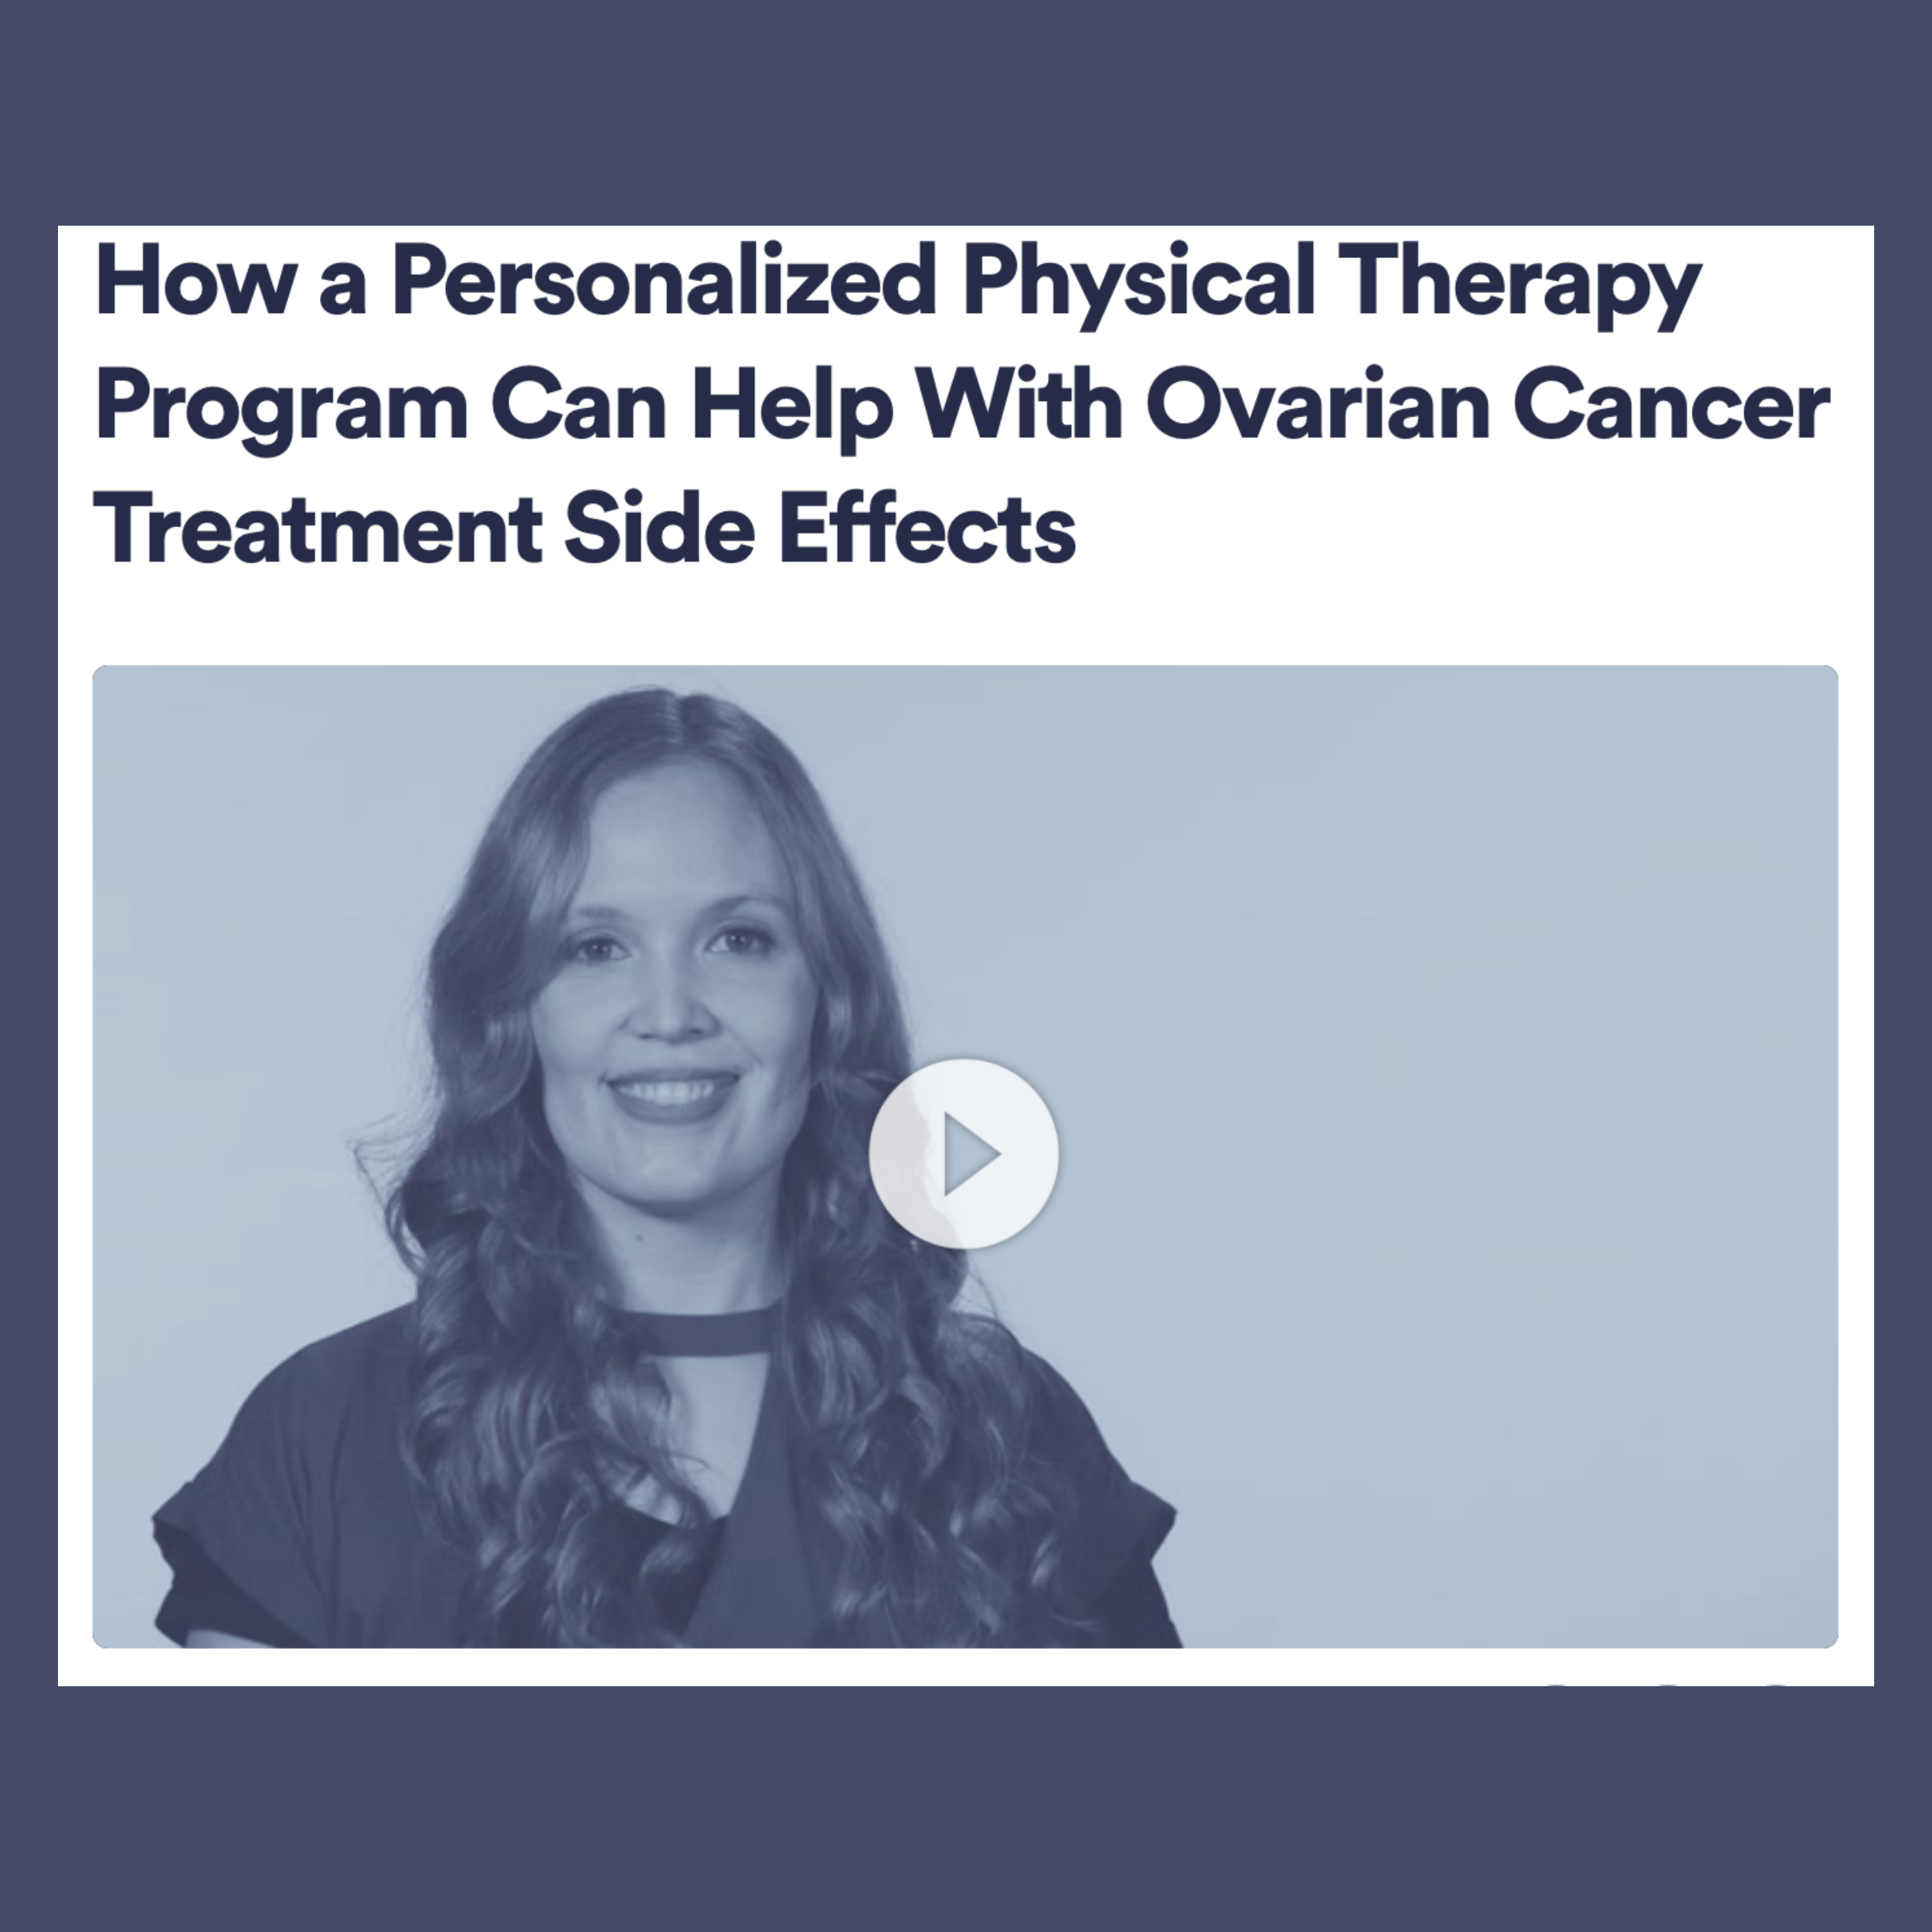 Ovarian Cancer and Physical Therapy: Survivornet Interview